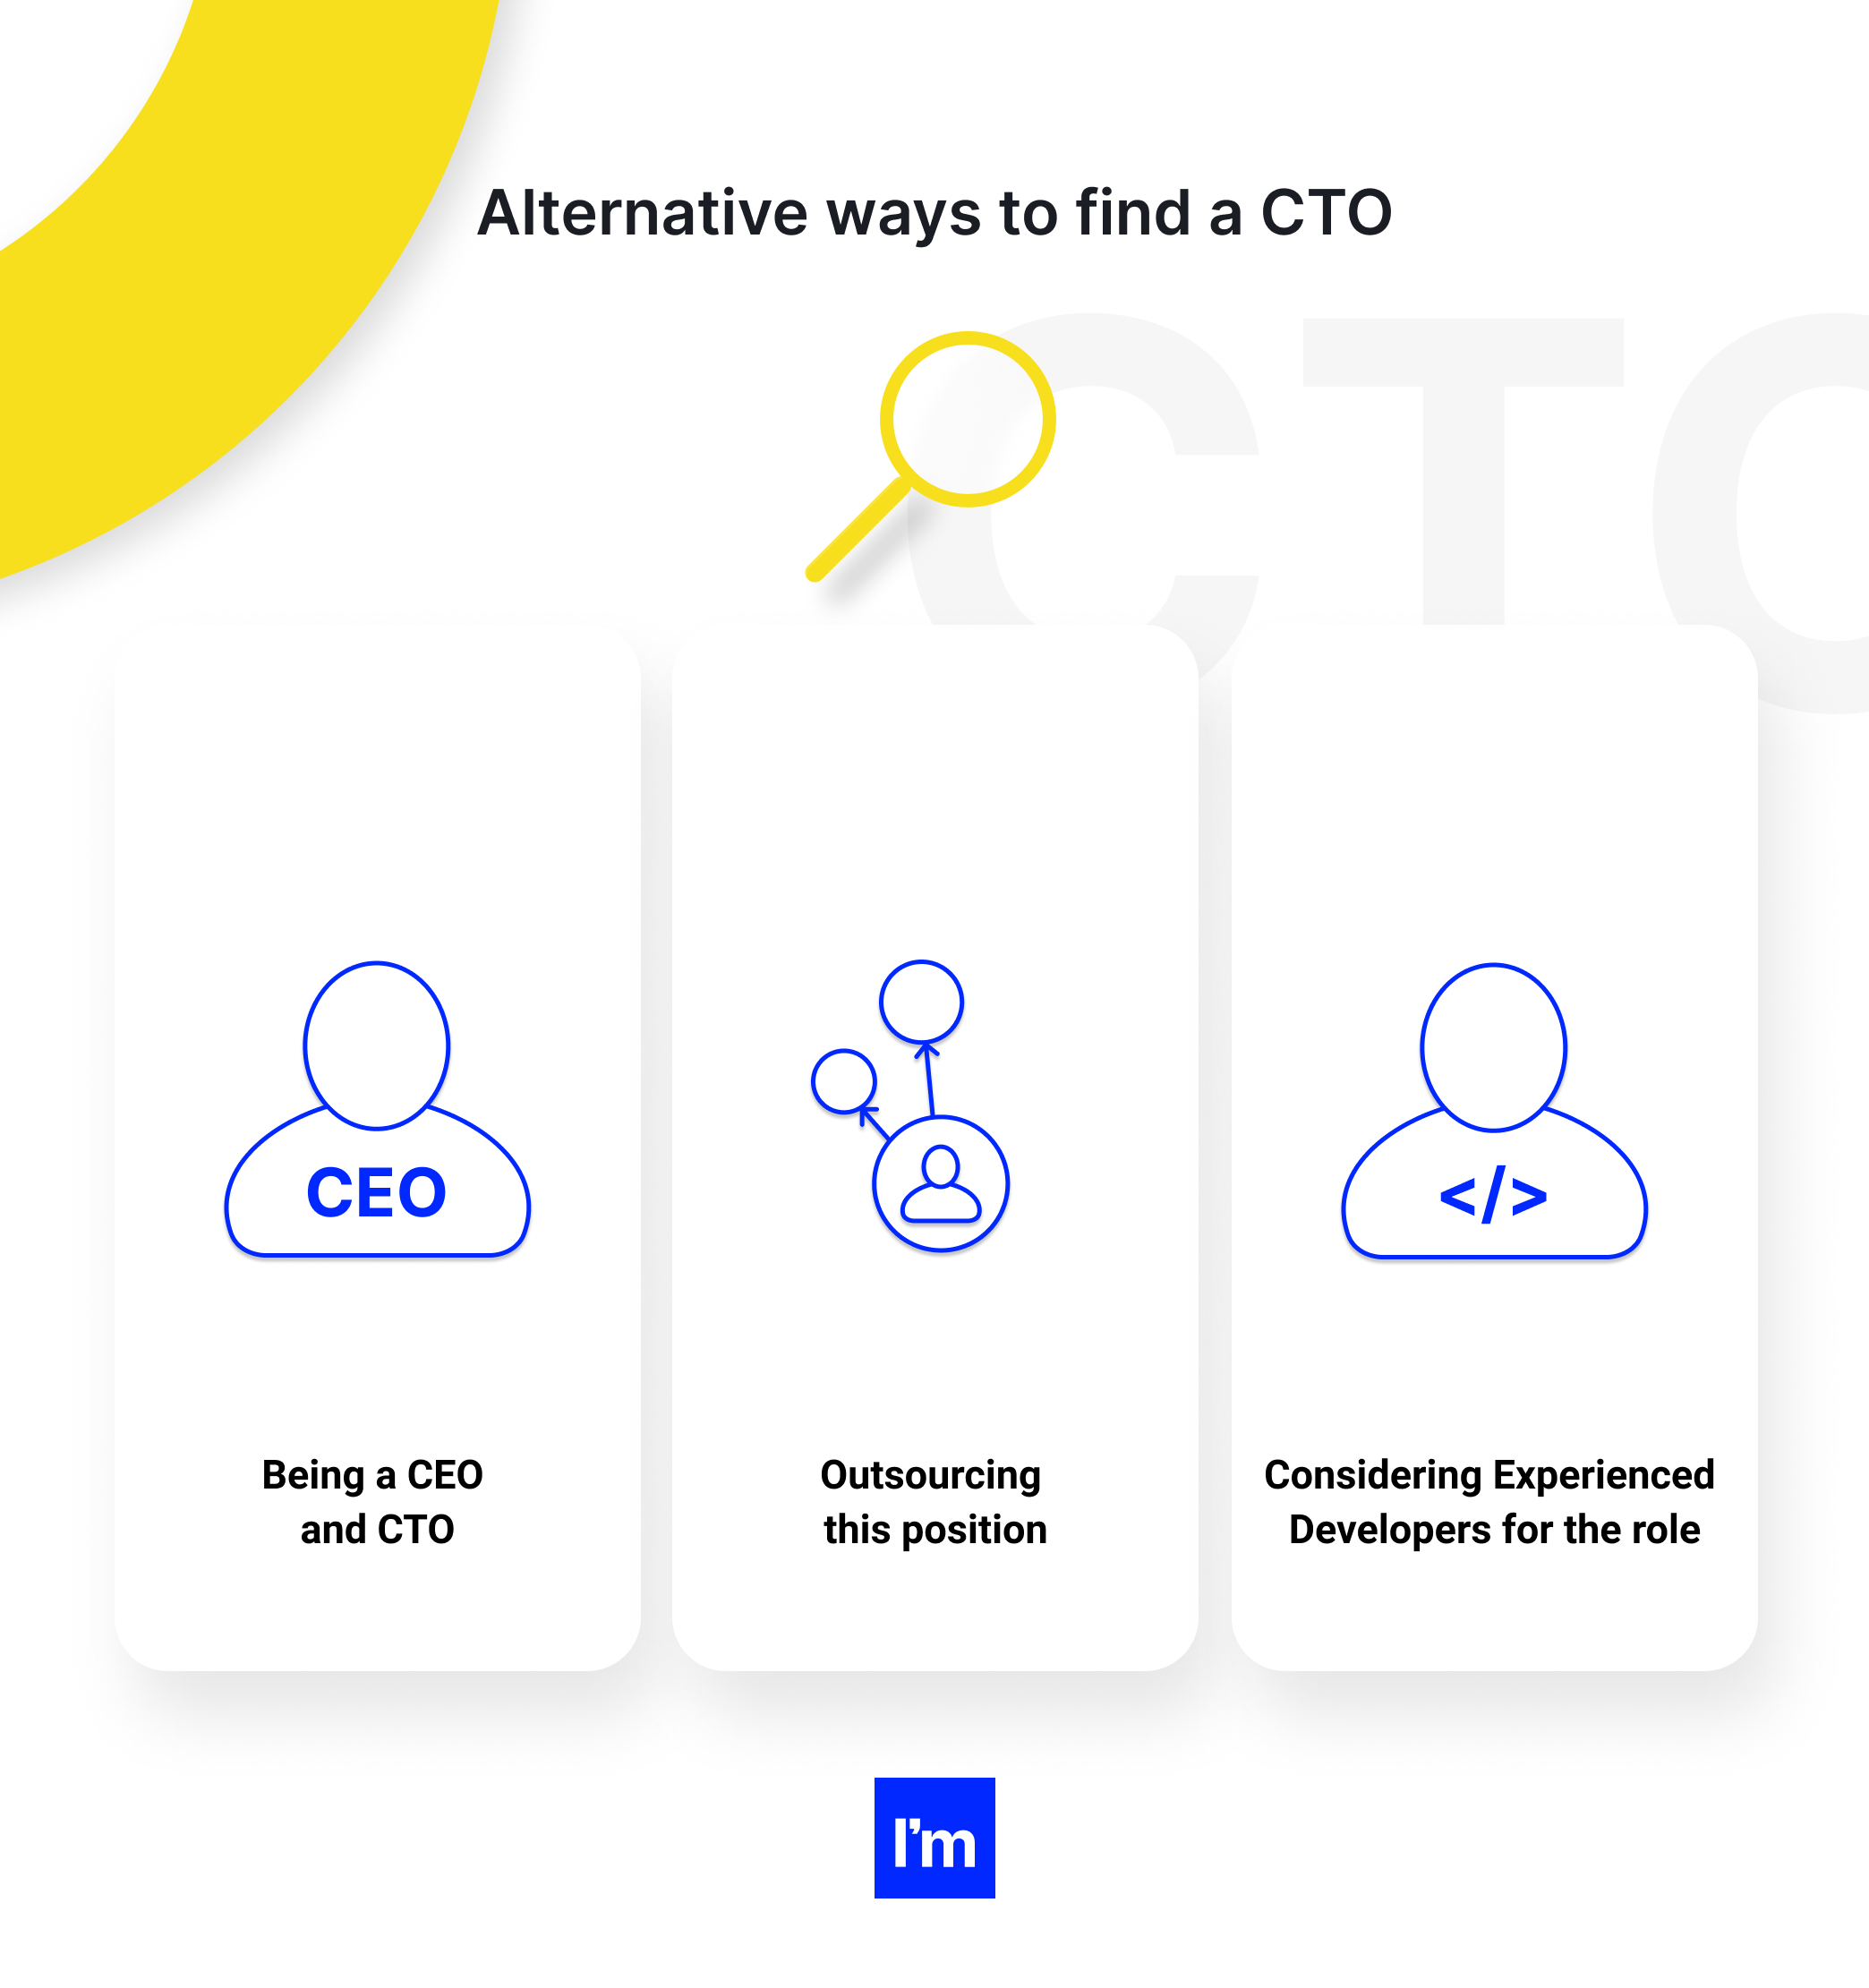 how to find cto alternative methods